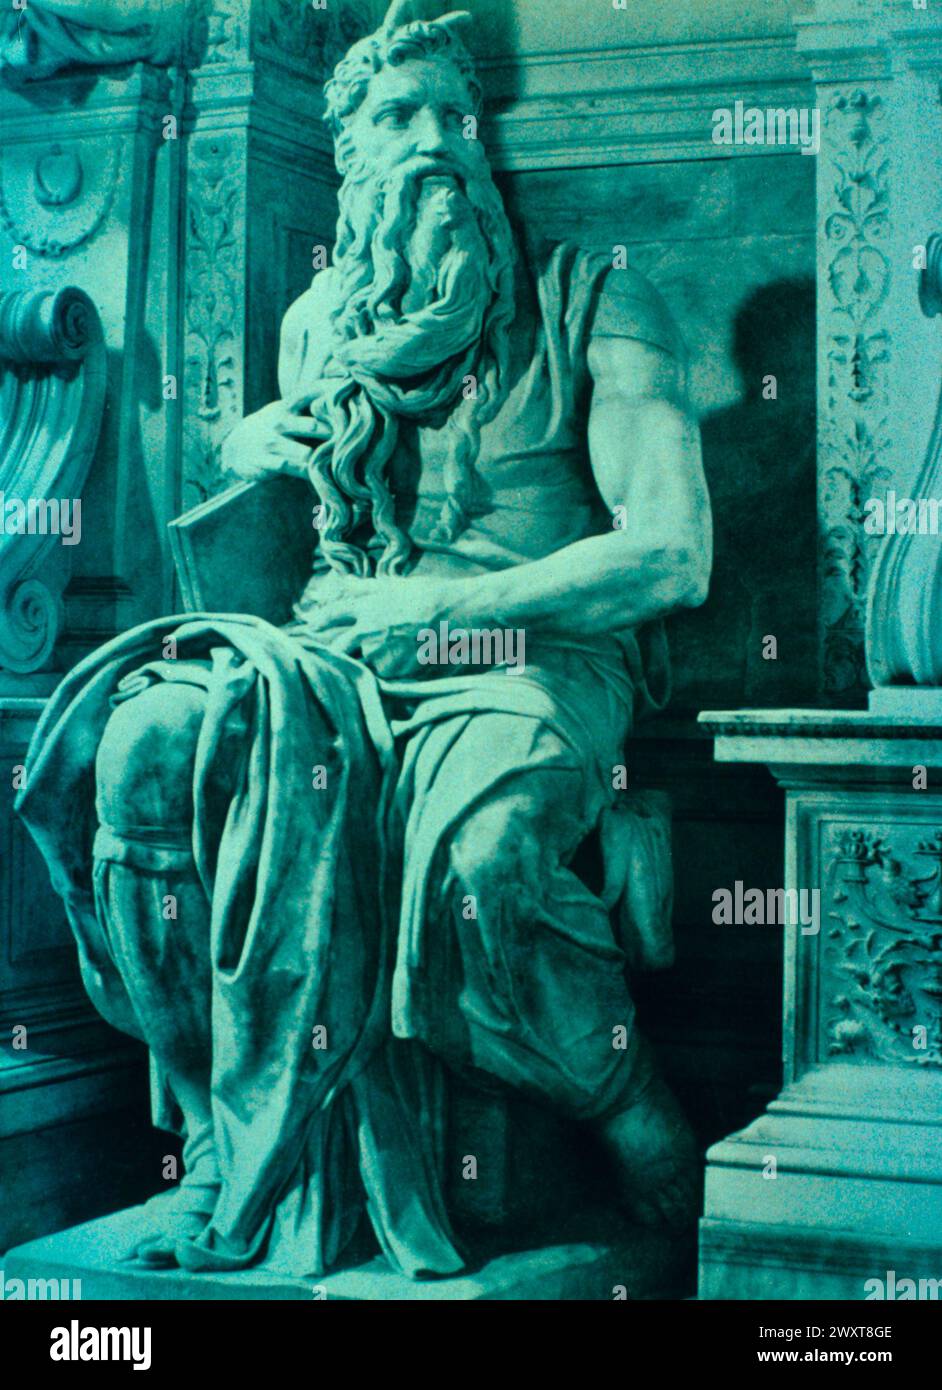 The statue Moses, sculpture by Italian artist Michelangelo, 16th century Stock Photo